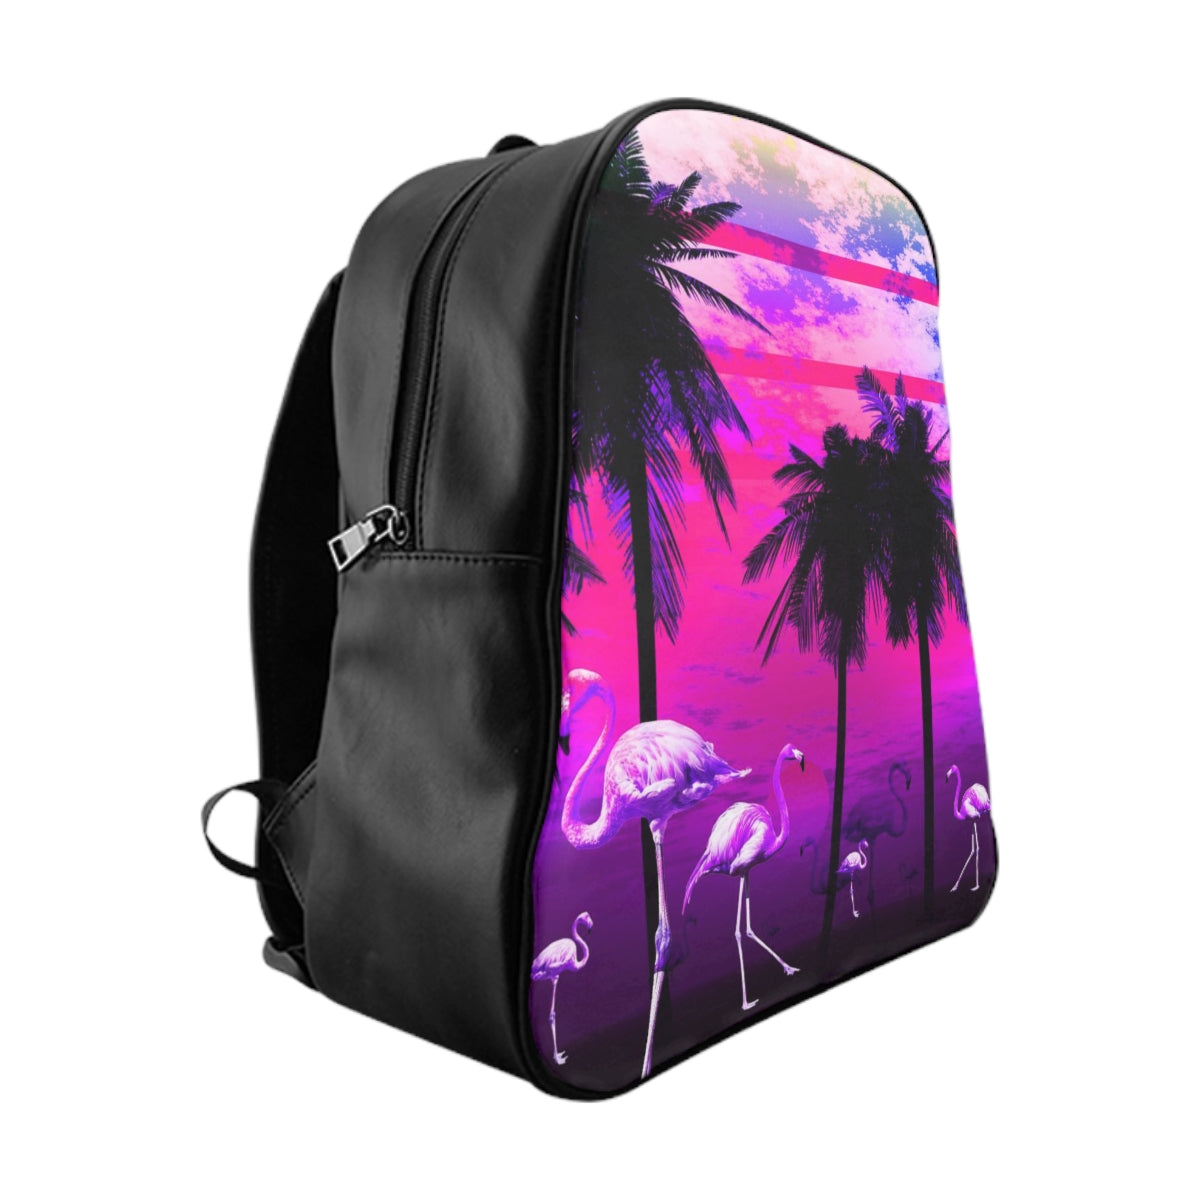 Getrott Pink Beach Flamingos Sunset Backpack Carry-On Travel Check Luggage 4-Wheel Spinner Suitcase Bag Multiple Colors and Sizes